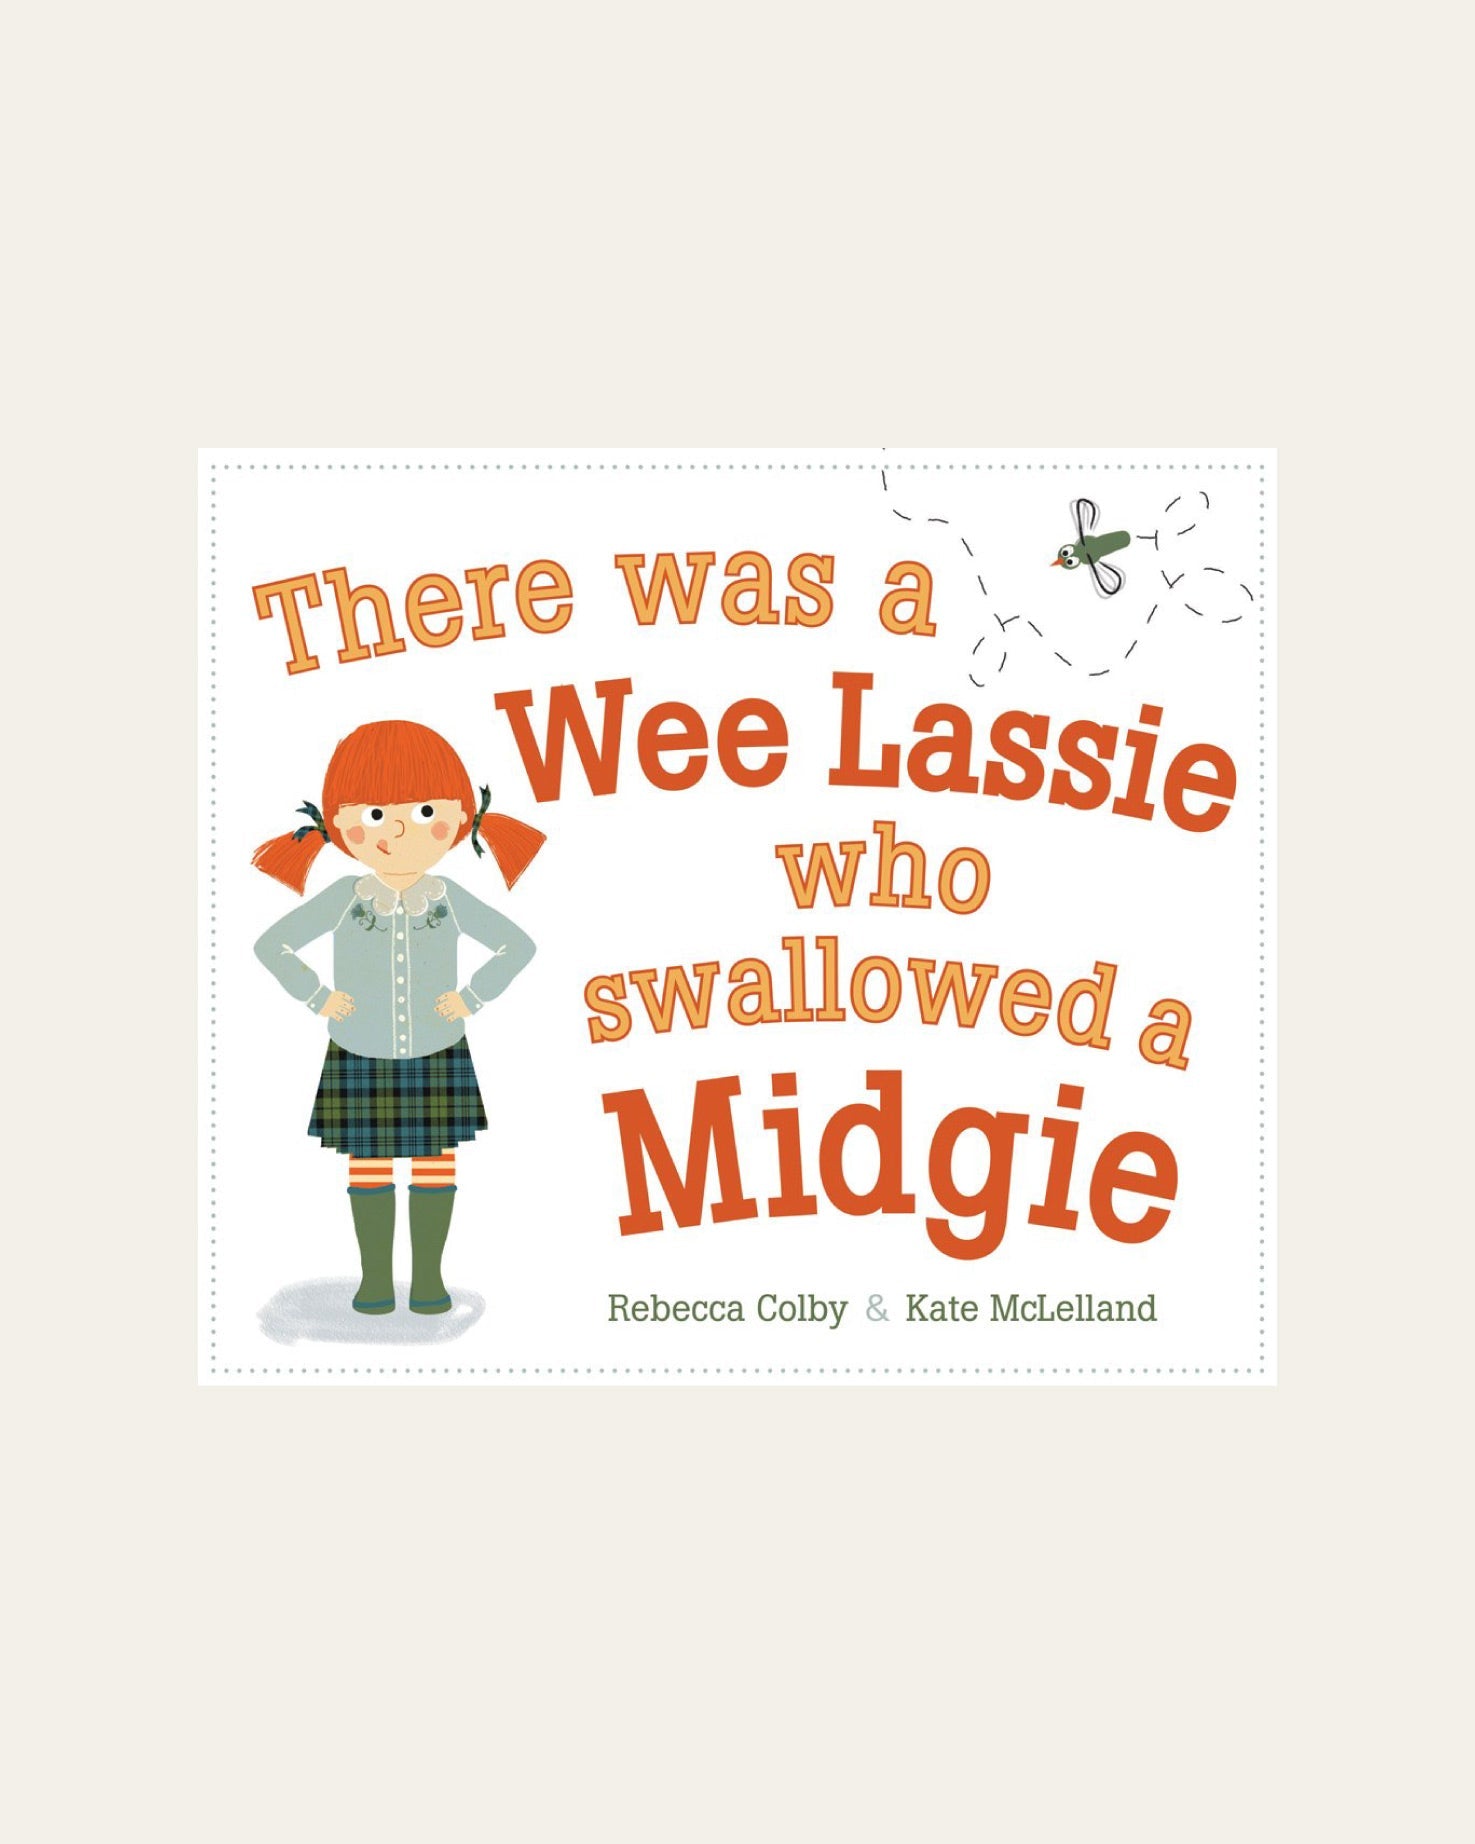 There was a wee lassie who swallowed a midgie - Hidden Scotland